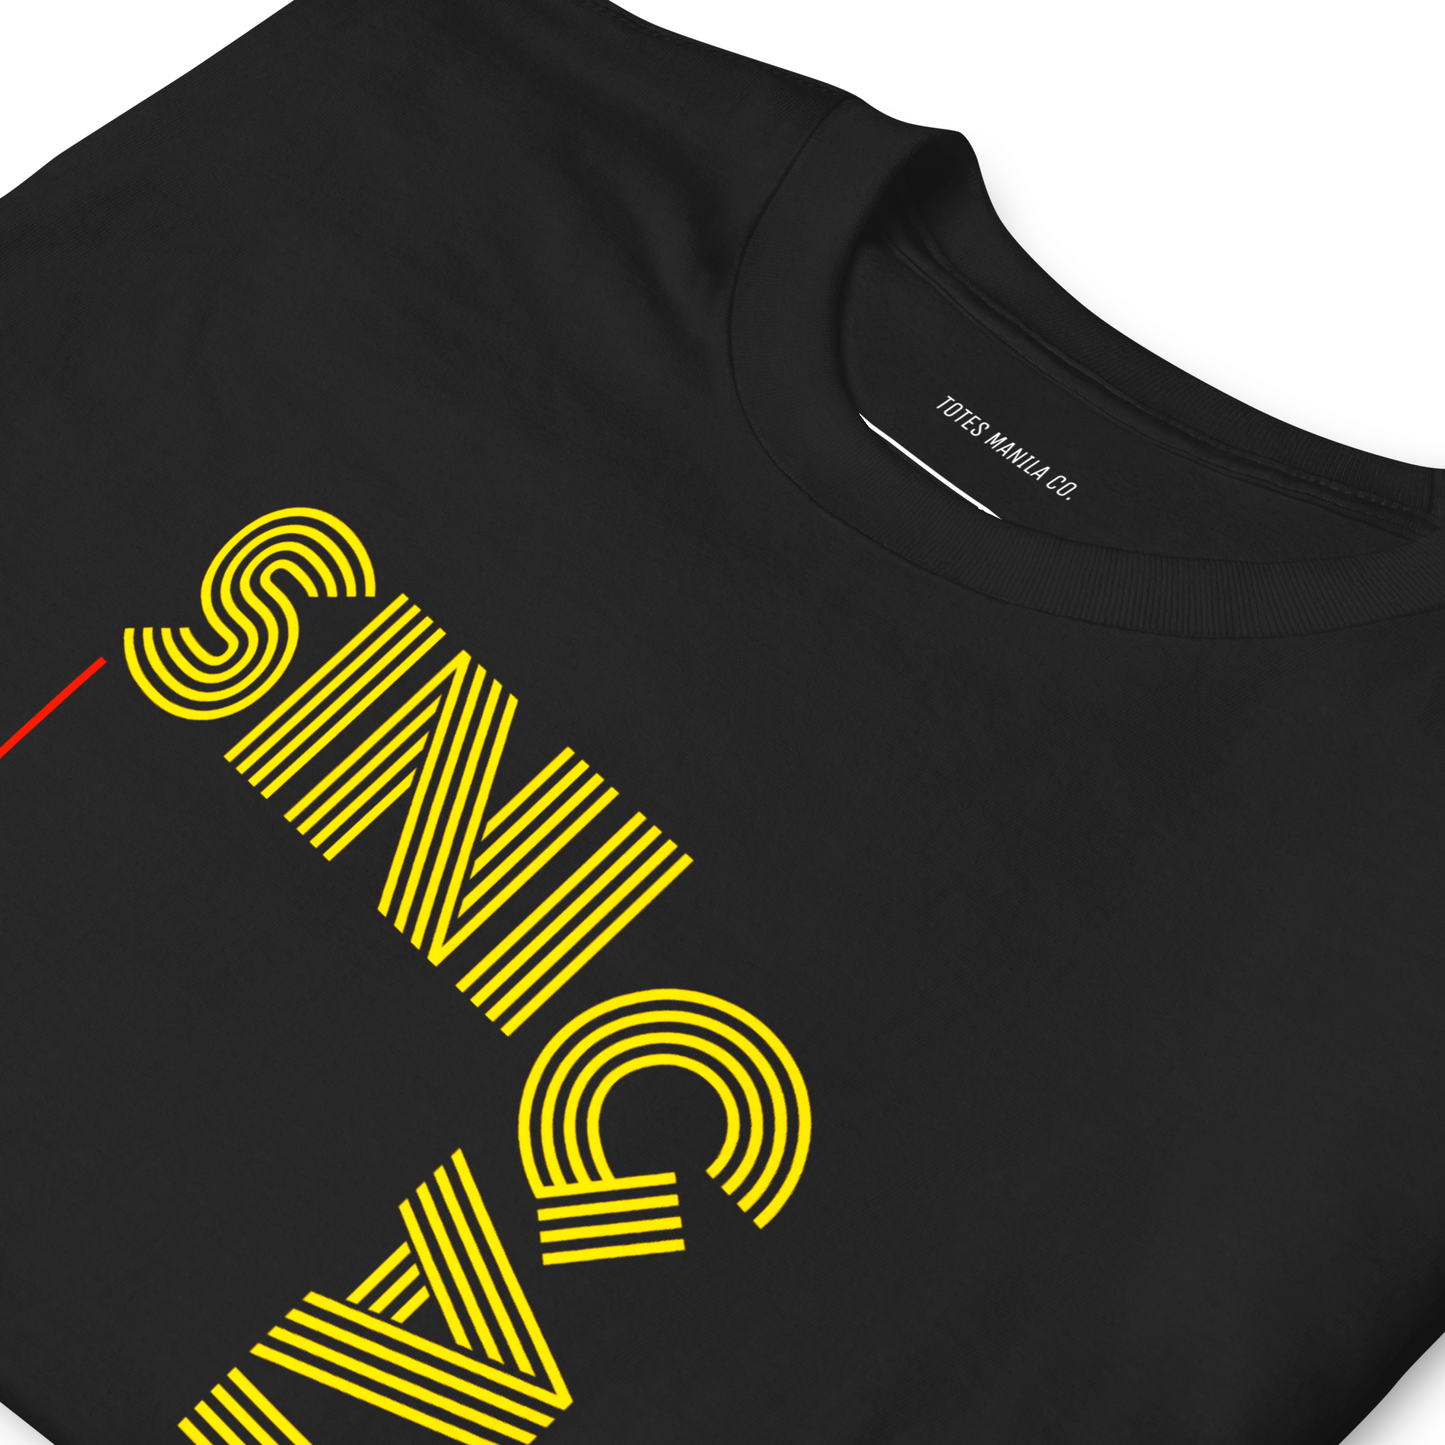 Close up of the Sinigang graphic design in a unisex black t-shirt.